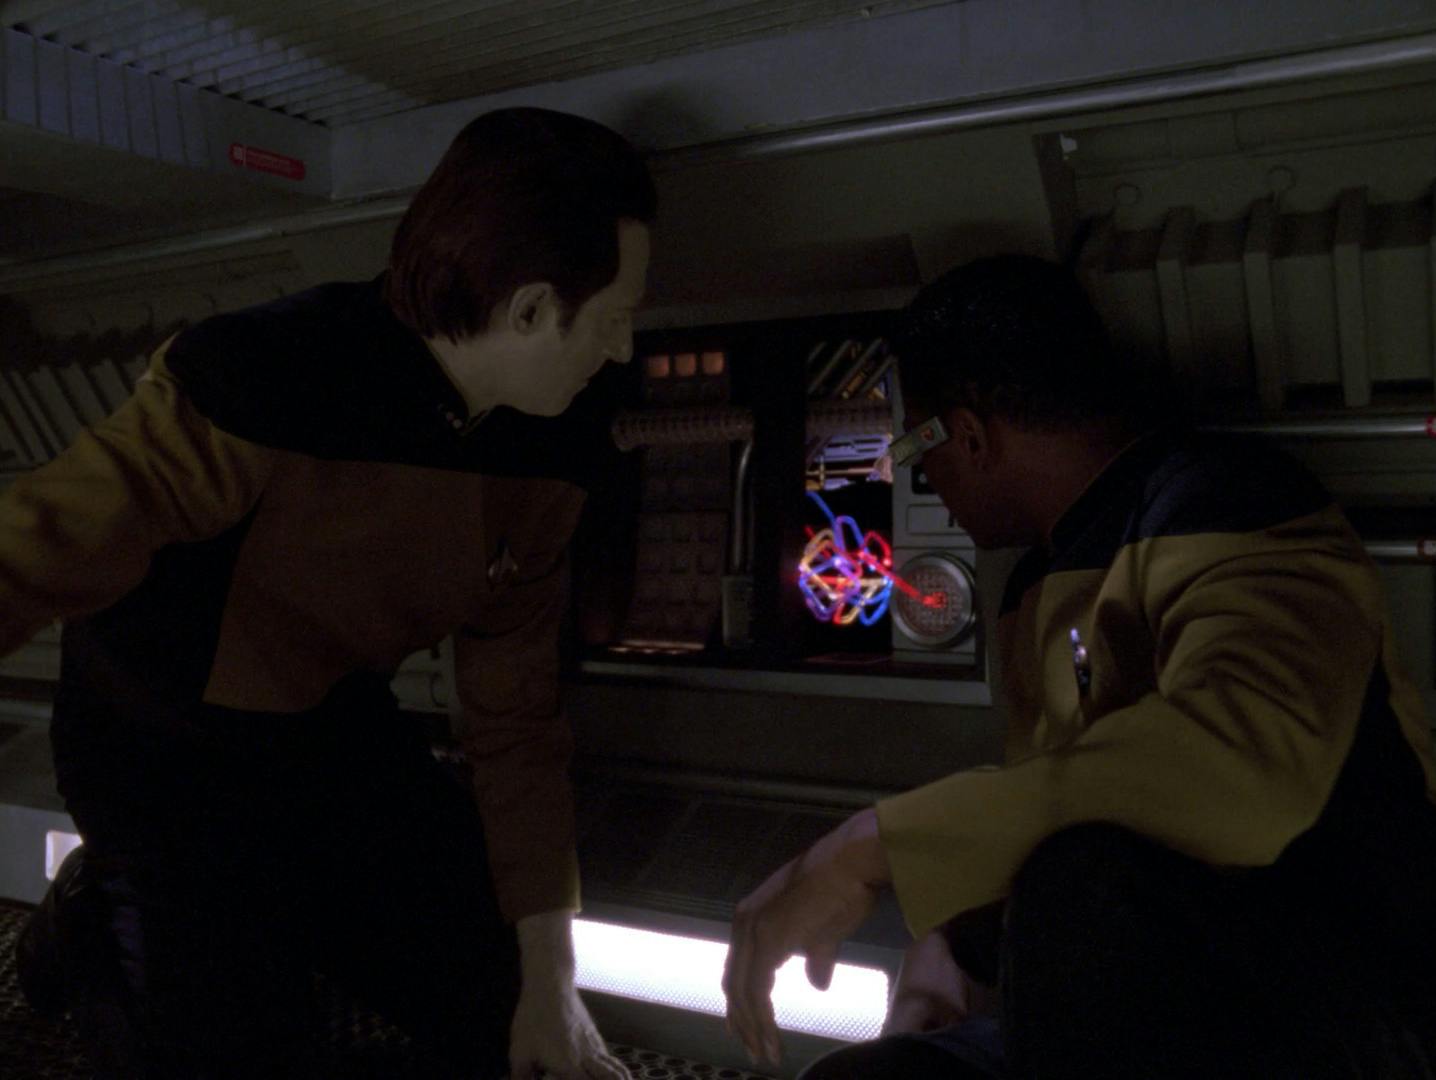 In a Jeffries tube, Data and Geordi La Forge huddle near an open panel that shows a malfunction in the ship's system in 'Emergence'